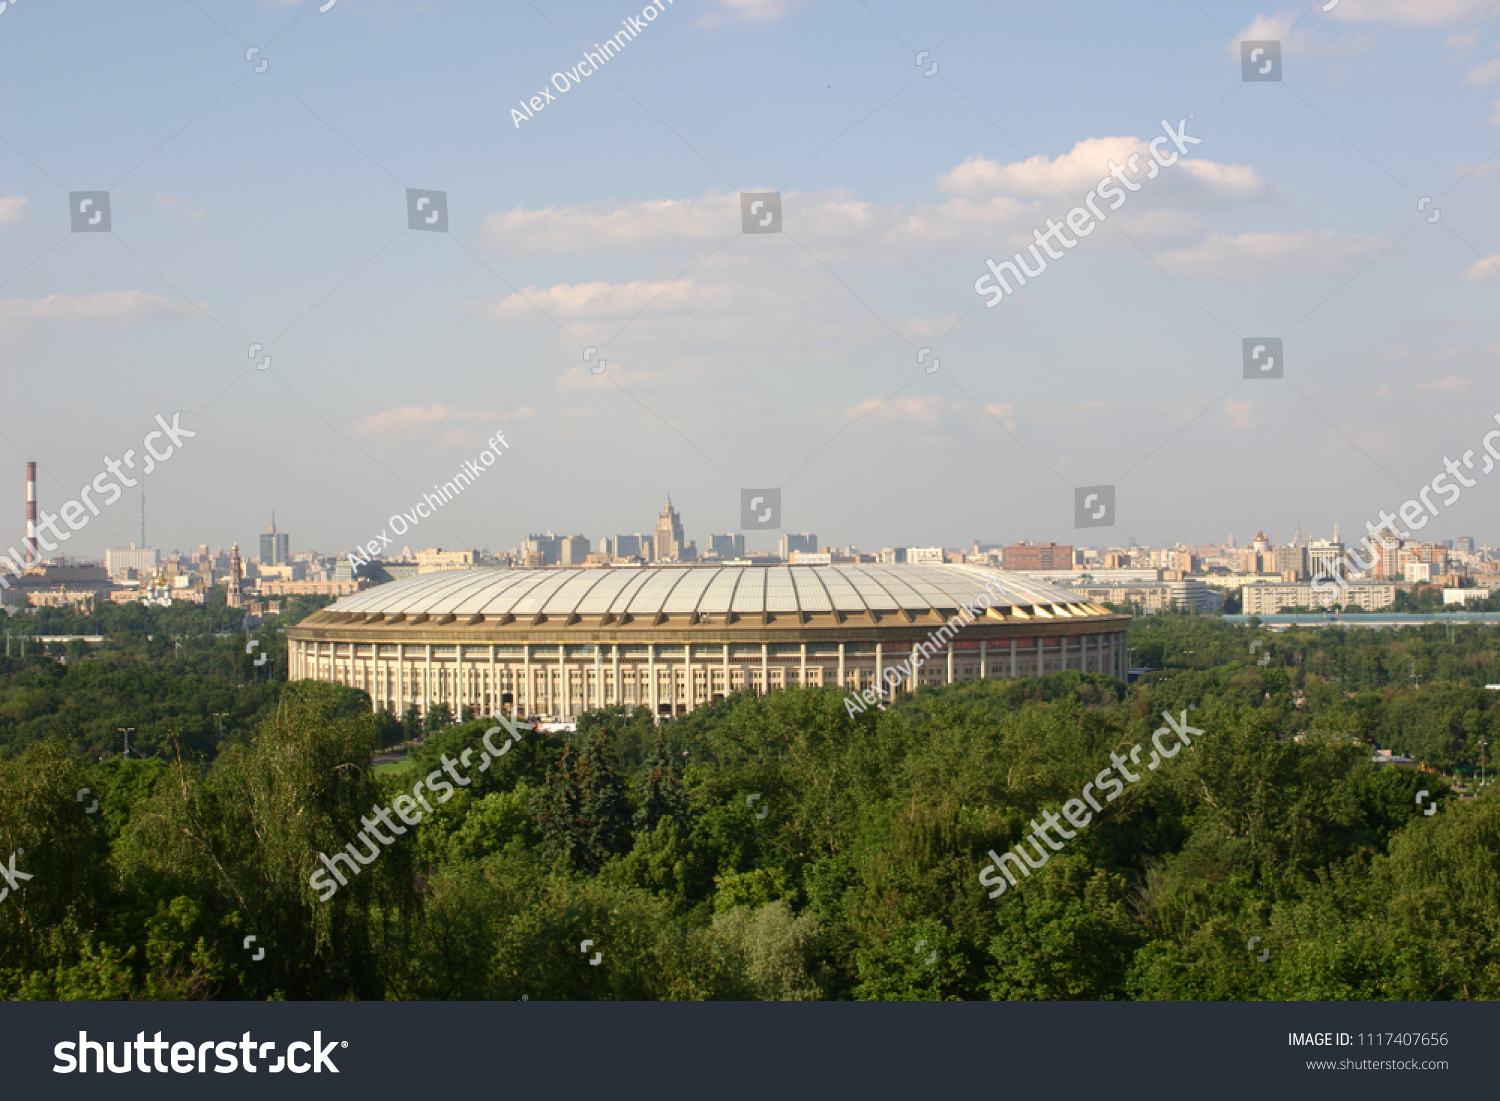 Luzhniki stadium  is the national stadium of Russia, located in its capital city,  The stadium is a part of the Luzhniki Olympic Complex. It was named the main stadium of 2018 FIFA World Cup #1117407656